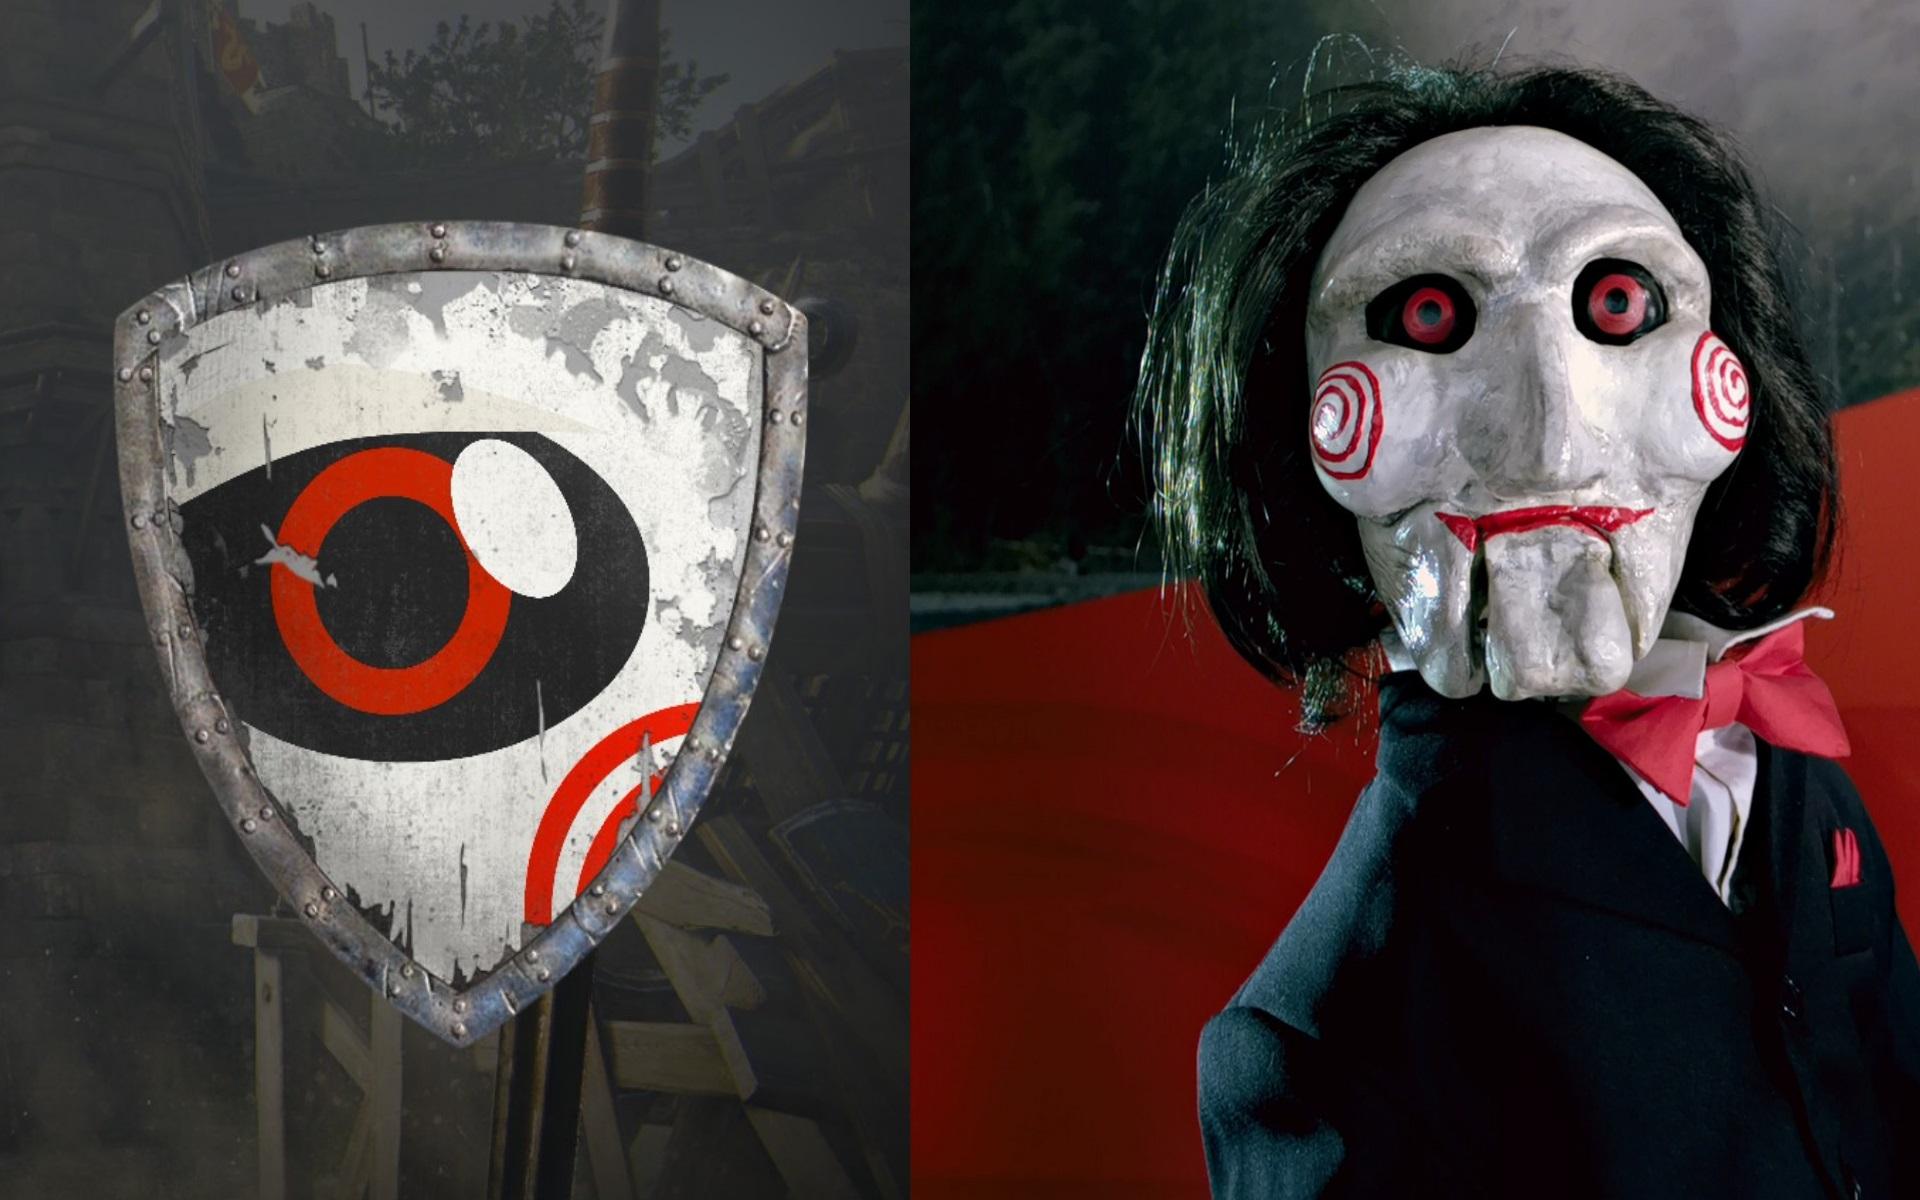 I made Billy the Puppet from the SAW franchise, I hope you all like it!